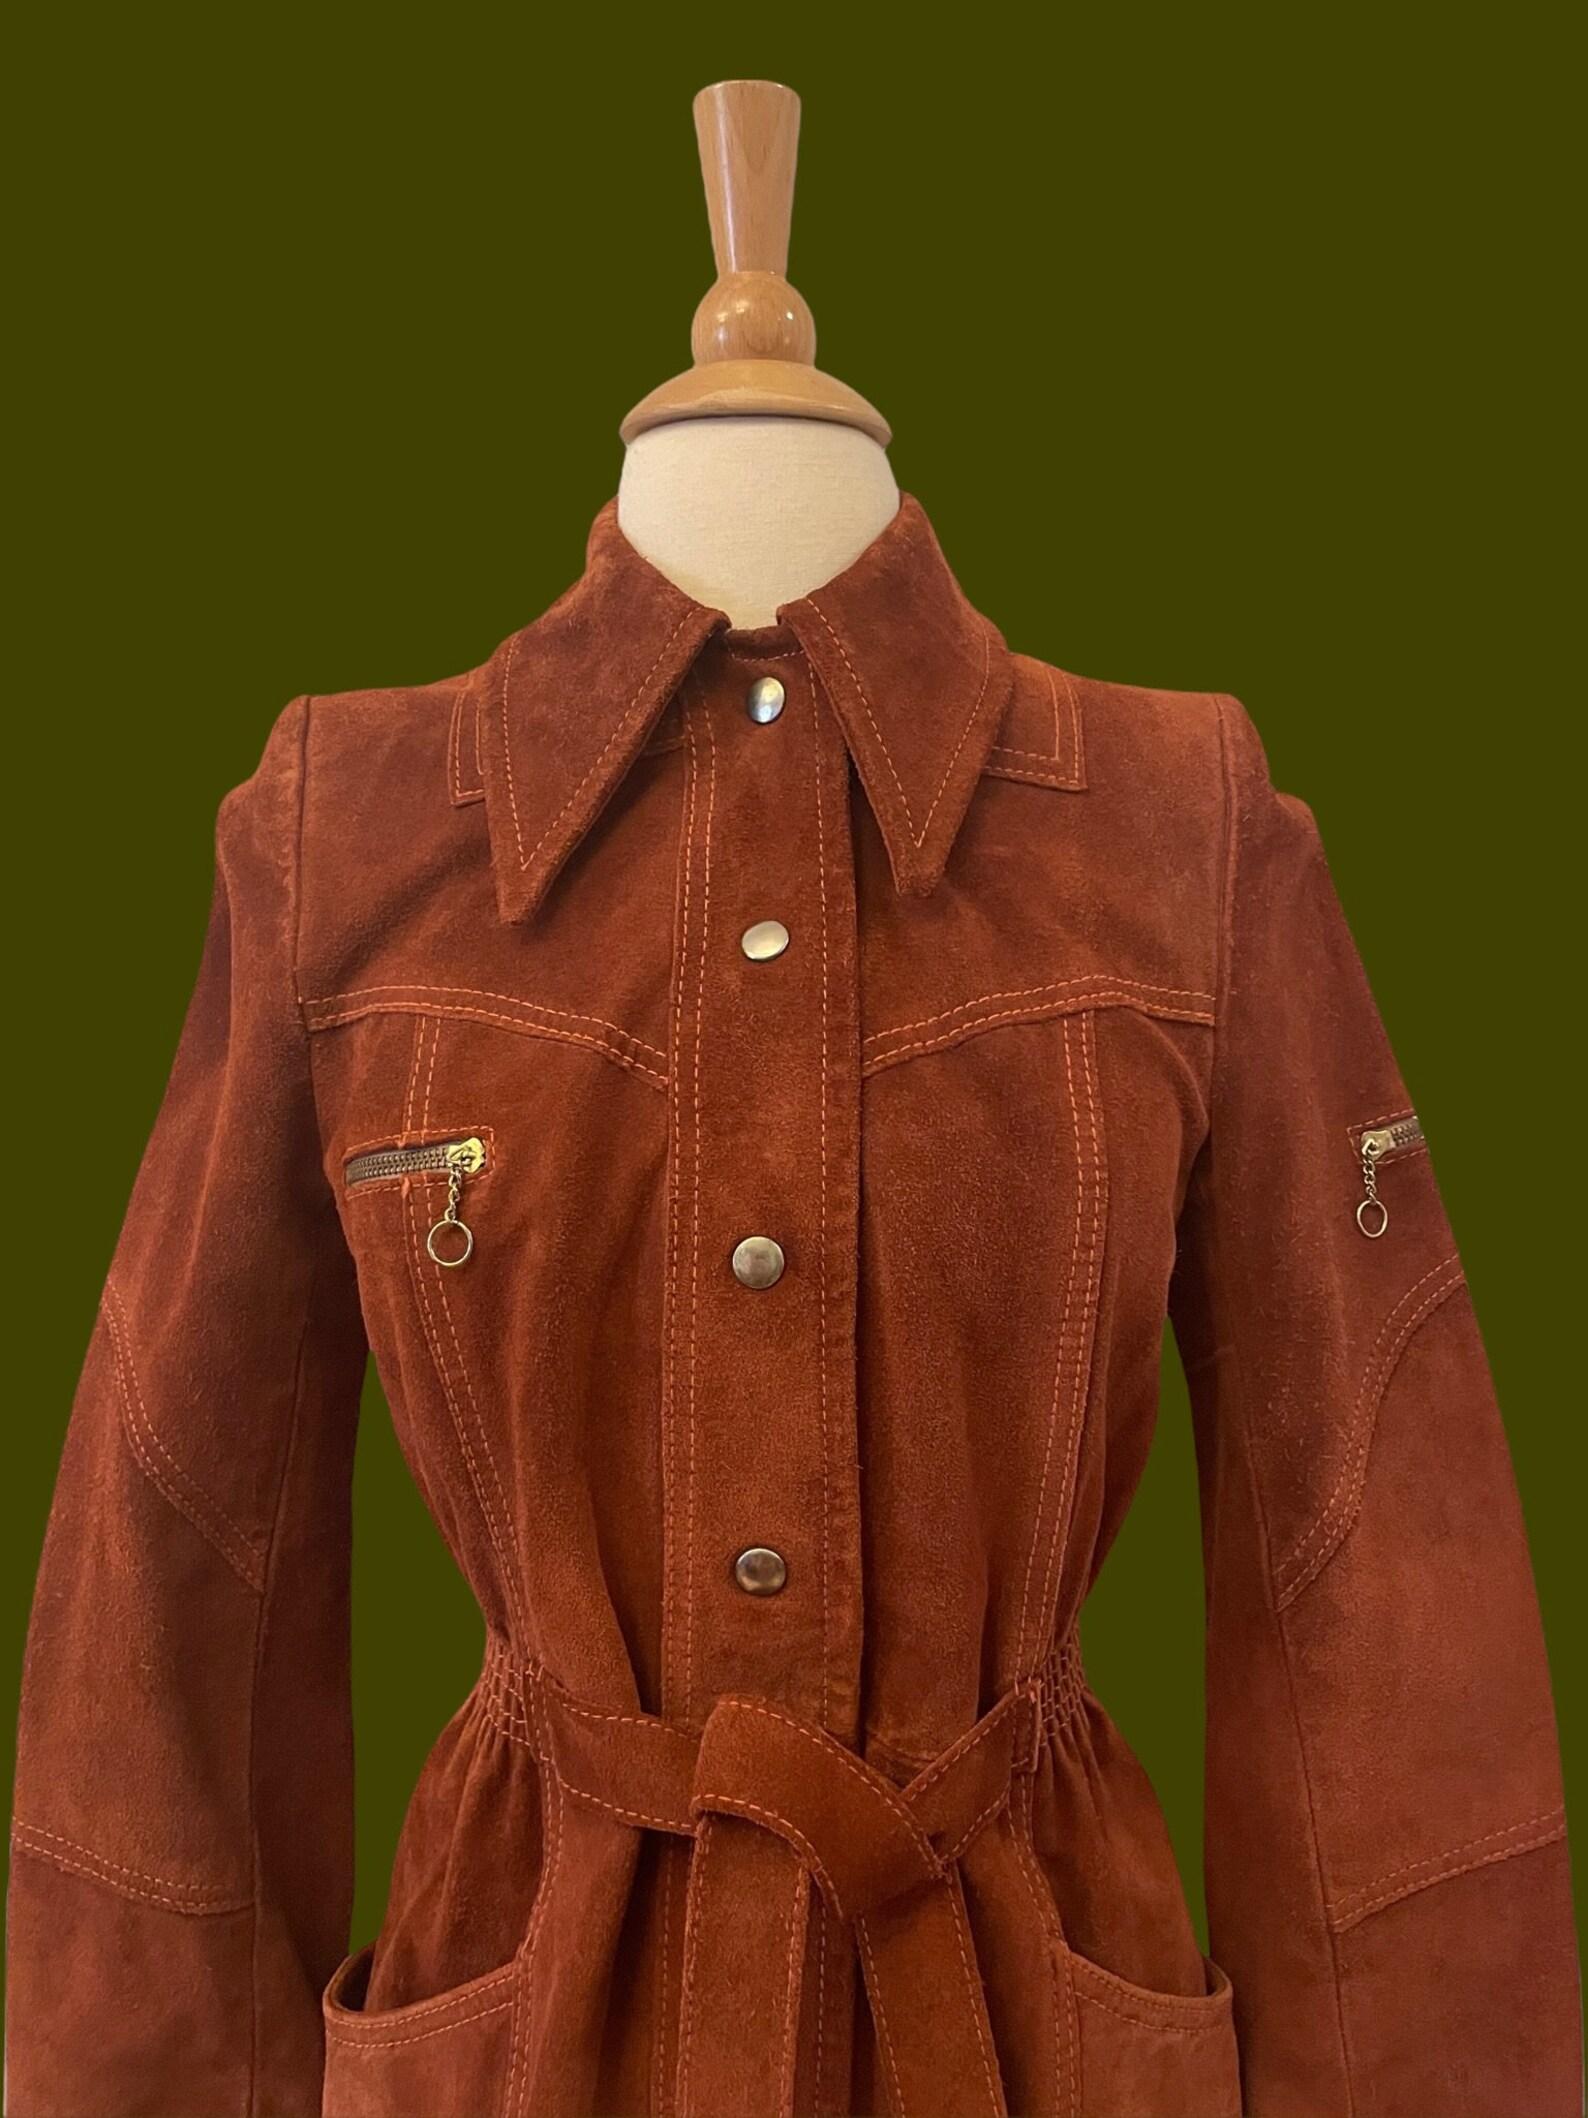 1970s Rust Brown Suede Jacket In Excellent Condition For Sale In Brooklyn, NY